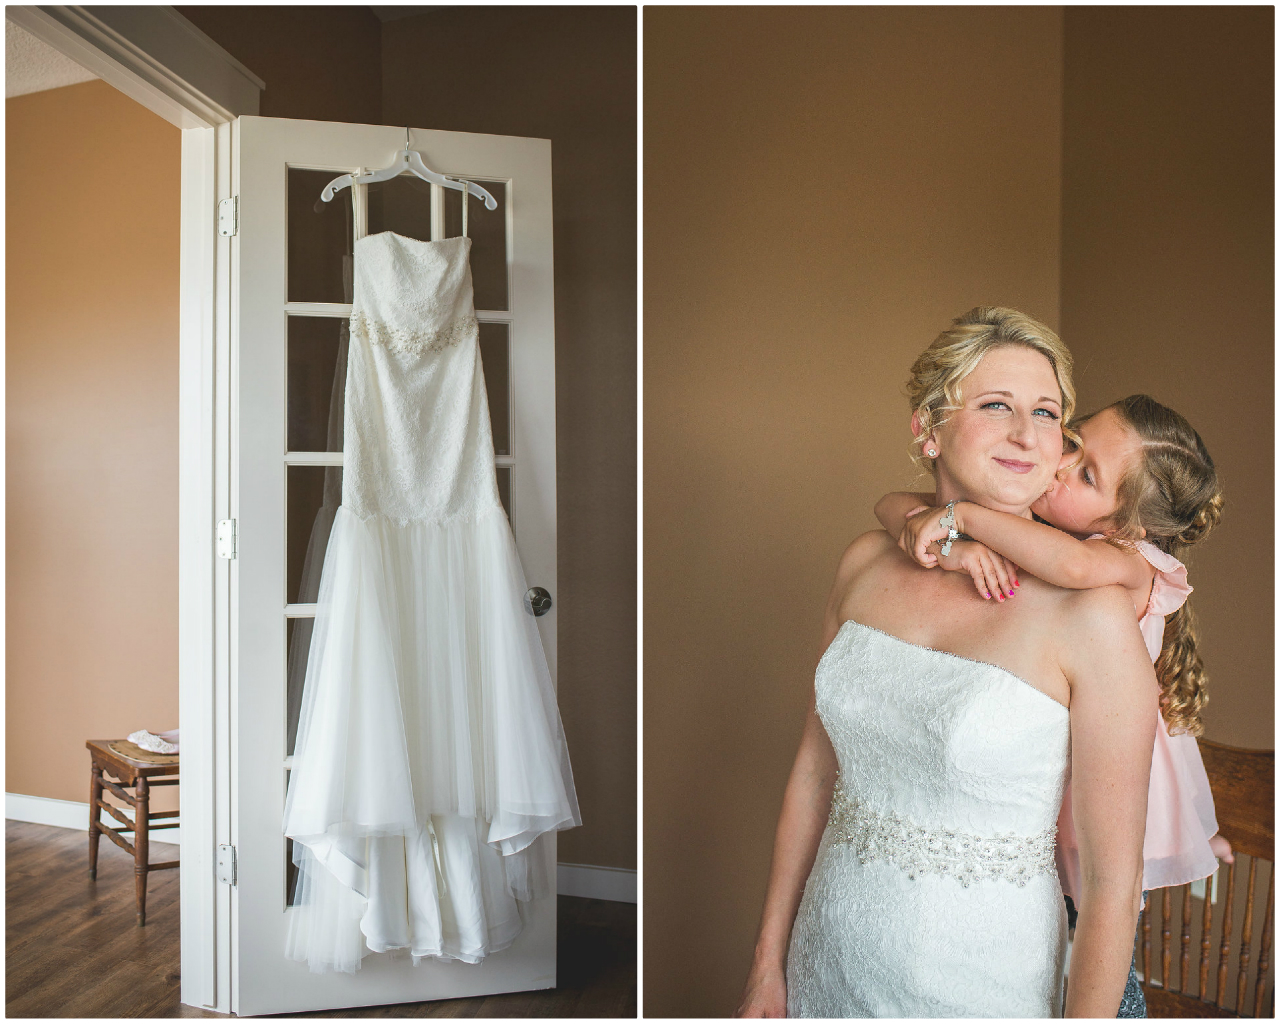 Big Rapids Wedding | The Day's Design | Emilee Mae Photography